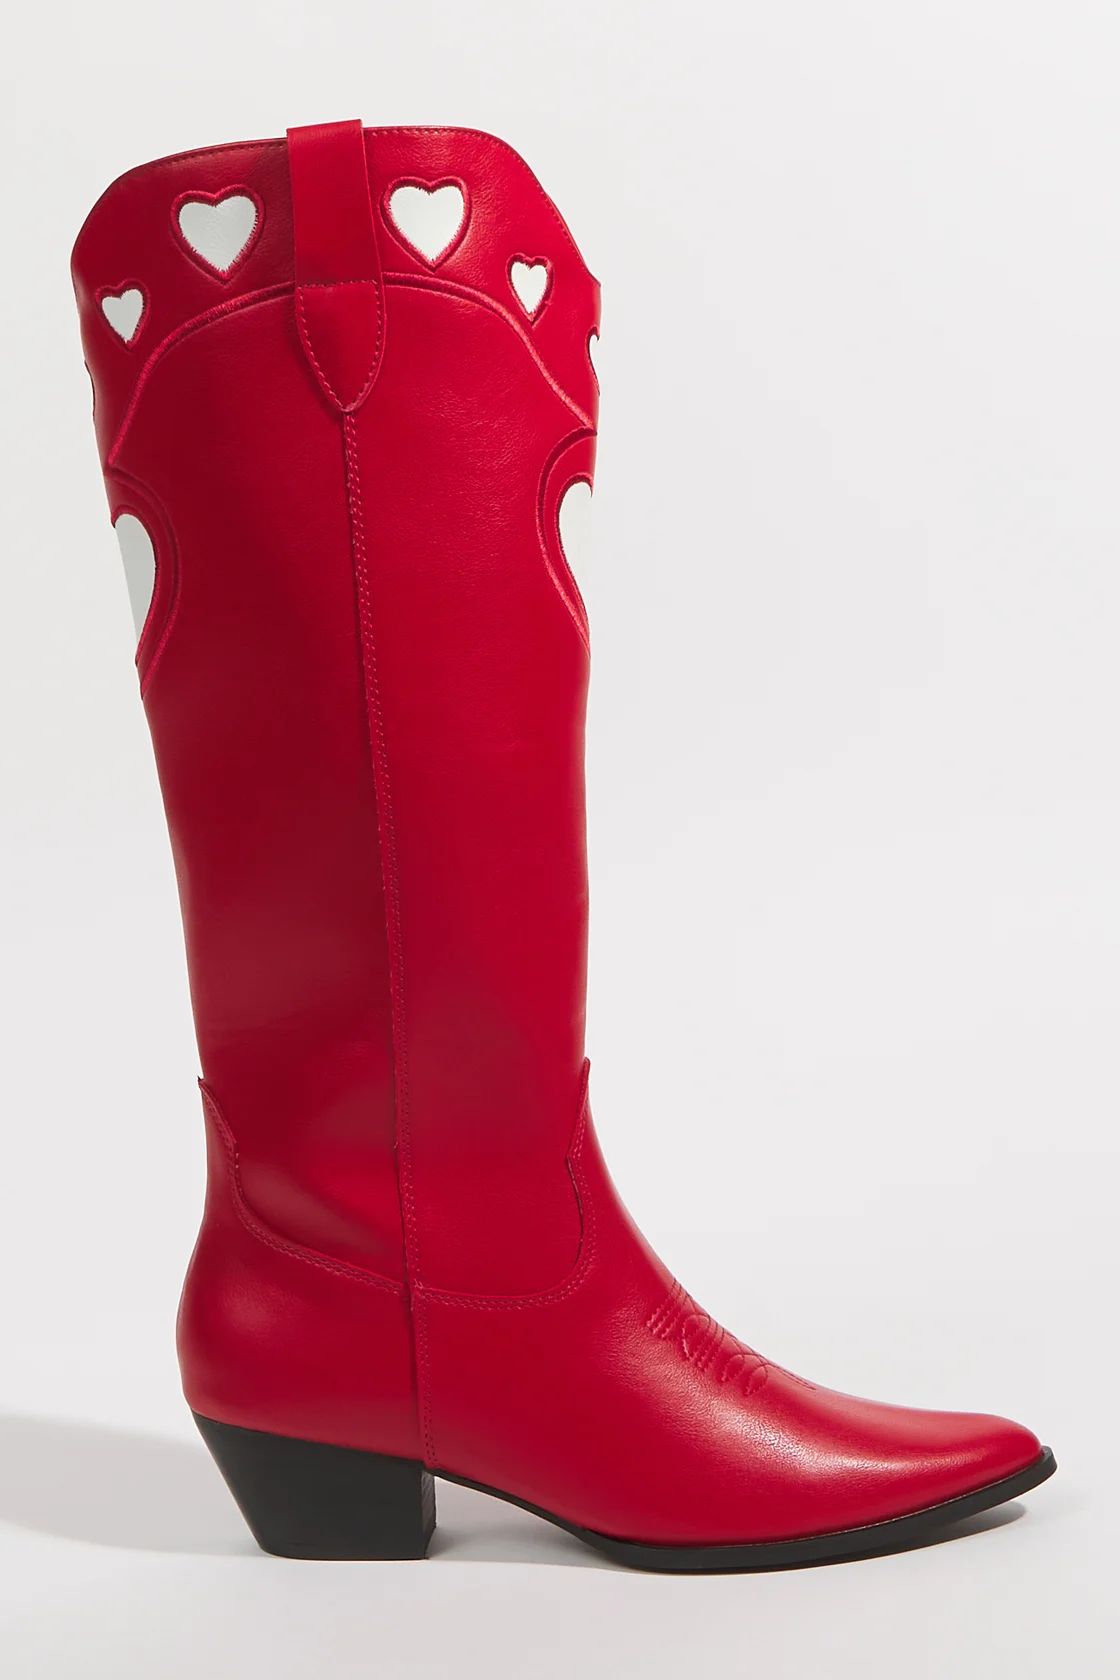 Velma Heart Boots by Billini | Altar'd State